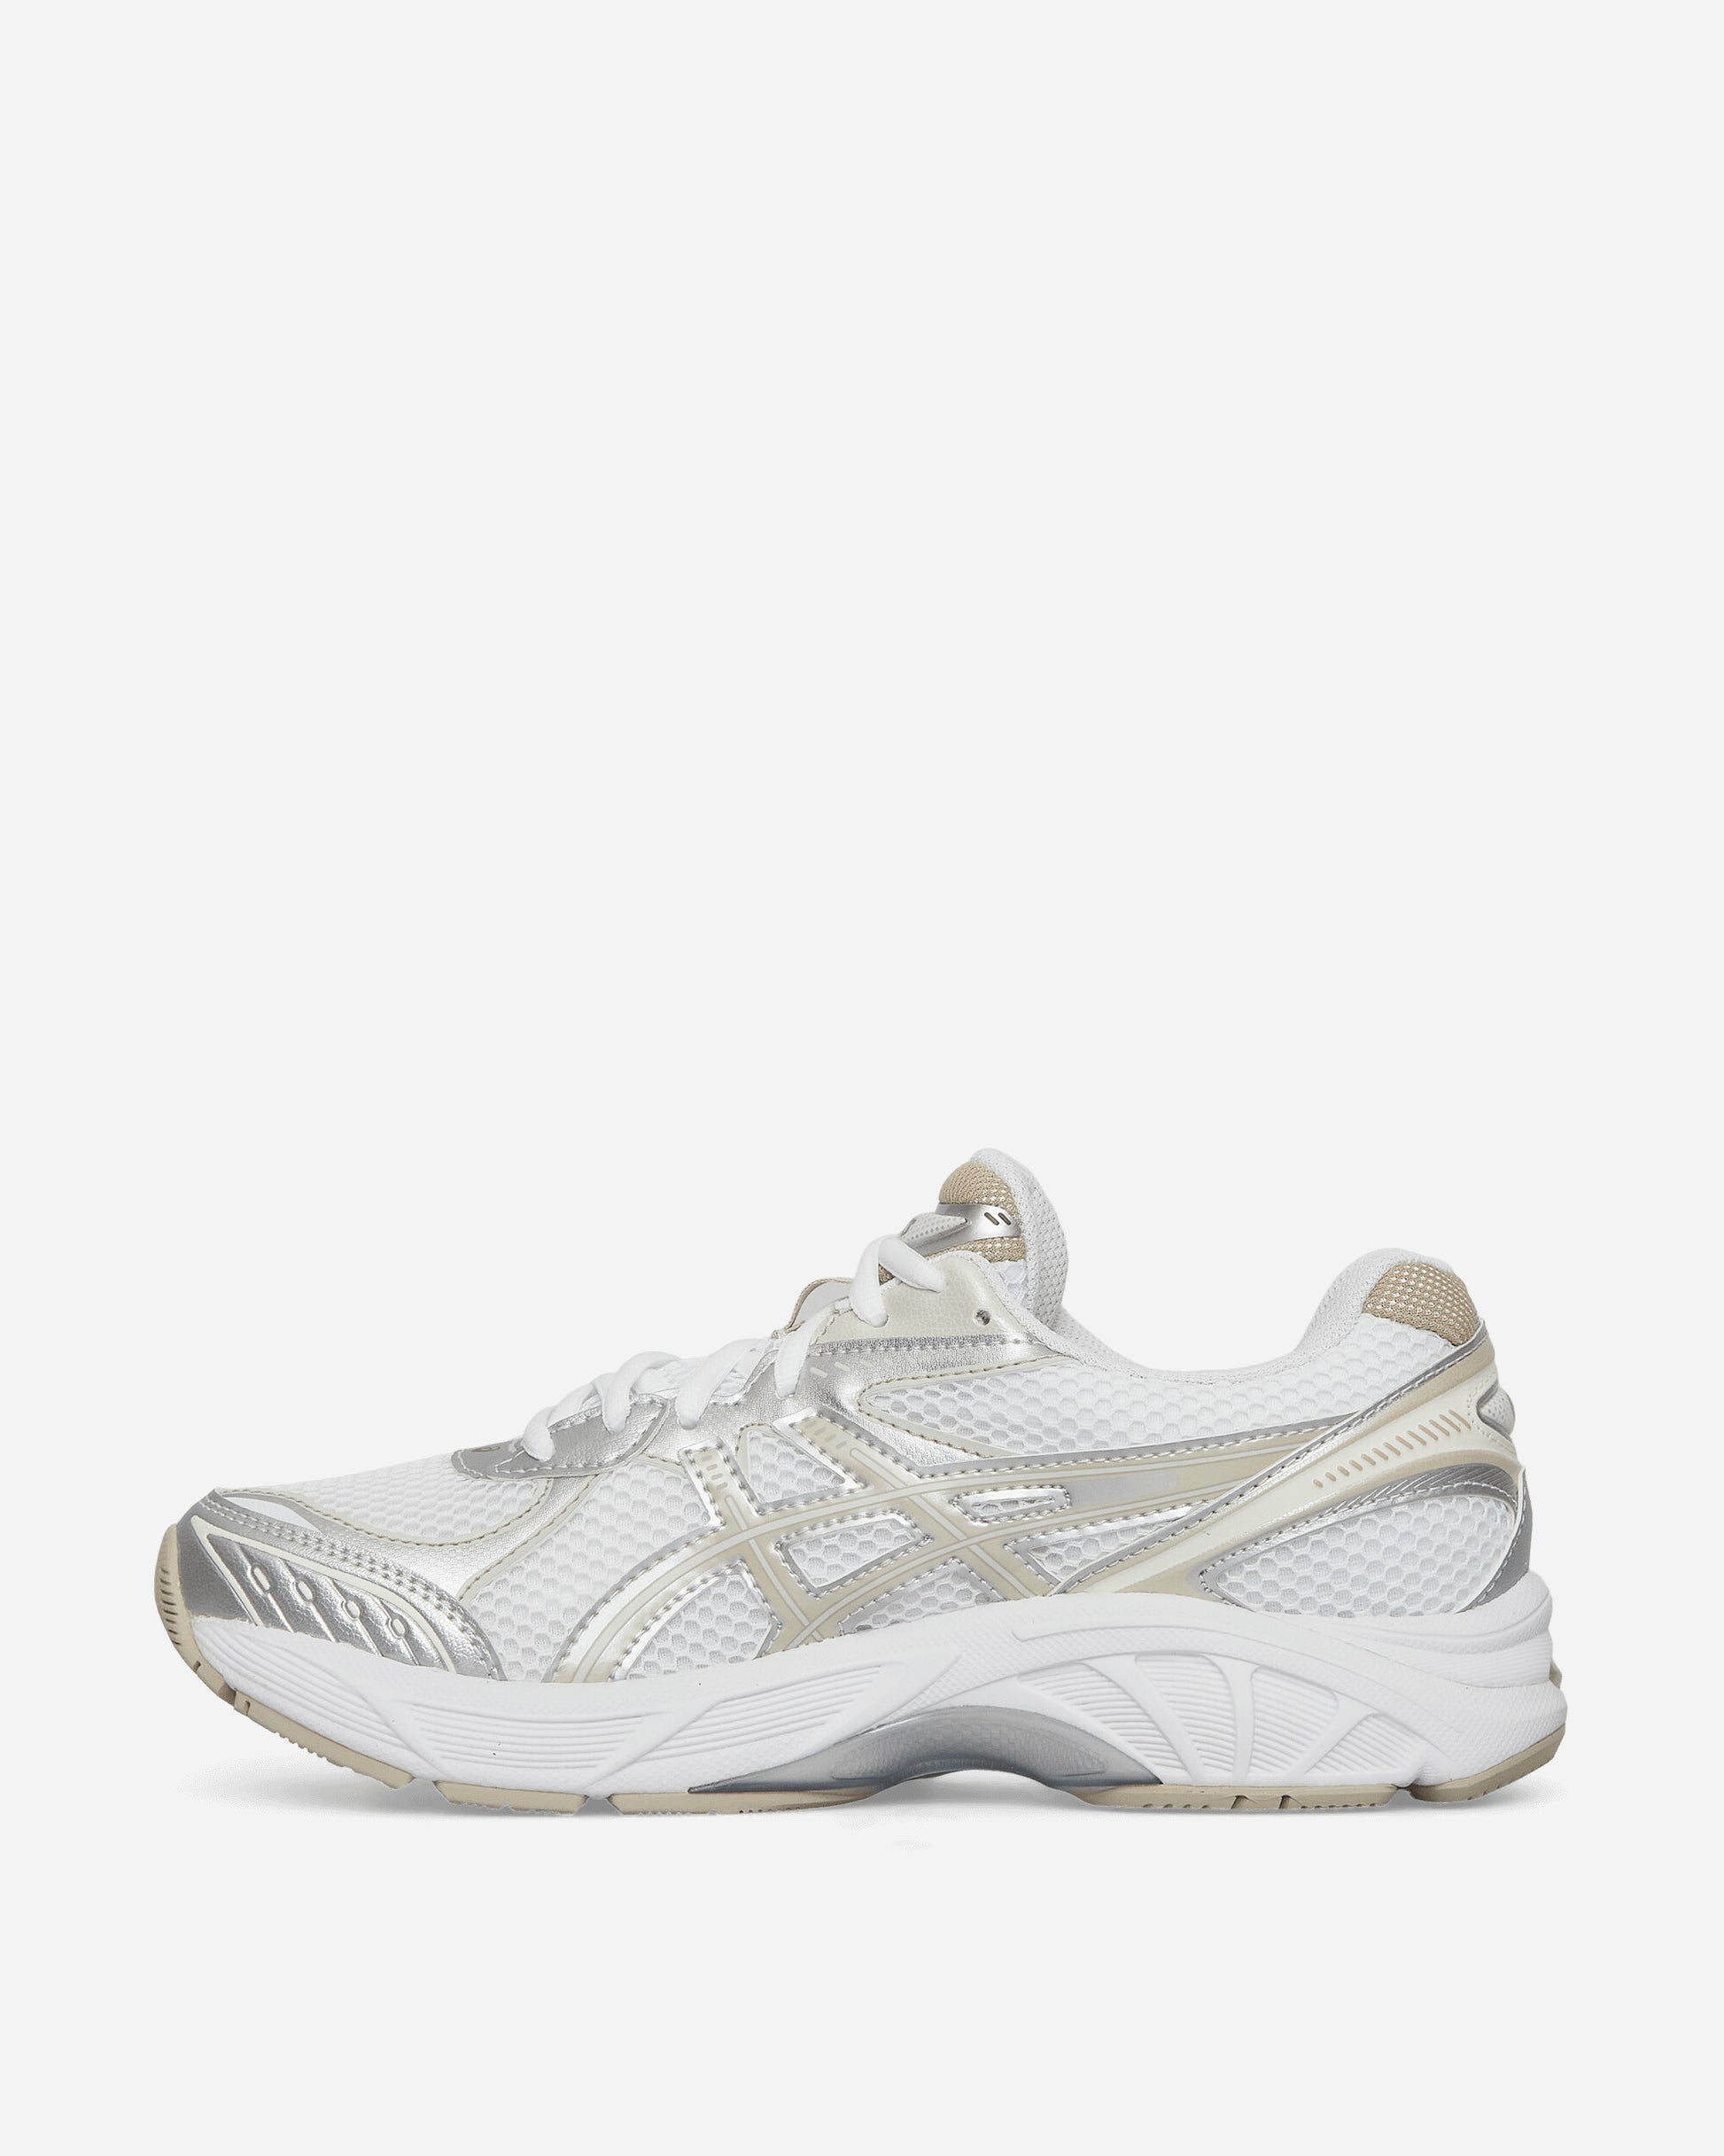 Asics Gt-2160 White/Putty Sneakers Low 1203A544-100